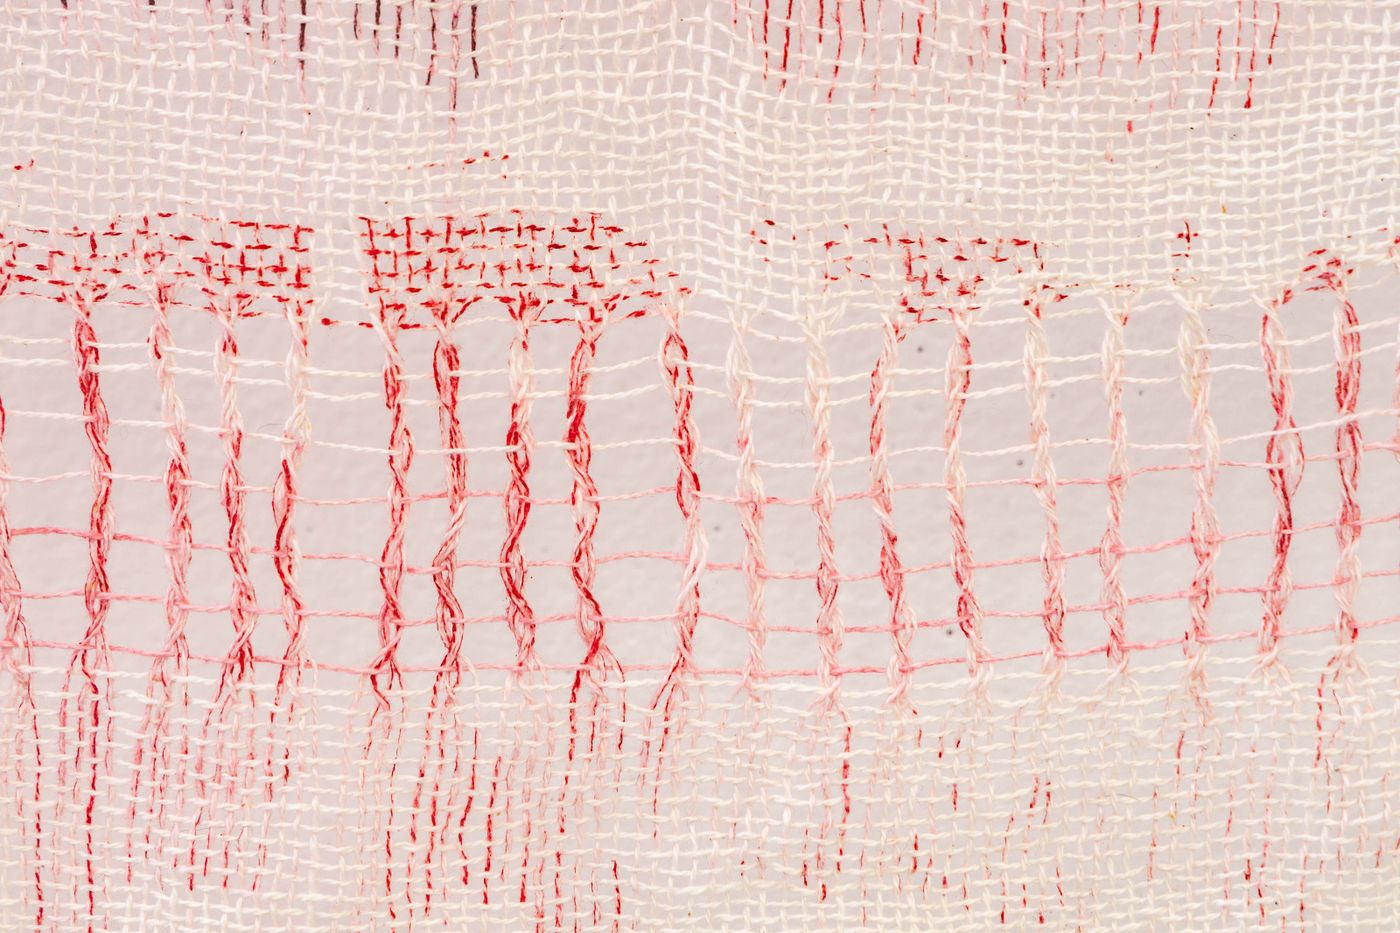 THE ELEMENTS MIGHT STAND UP (detail), 2022. Woven on rigid heddle loom with dye and leno-weave; 25.5 x 62.5 in. Photo: Meghan Olson. 